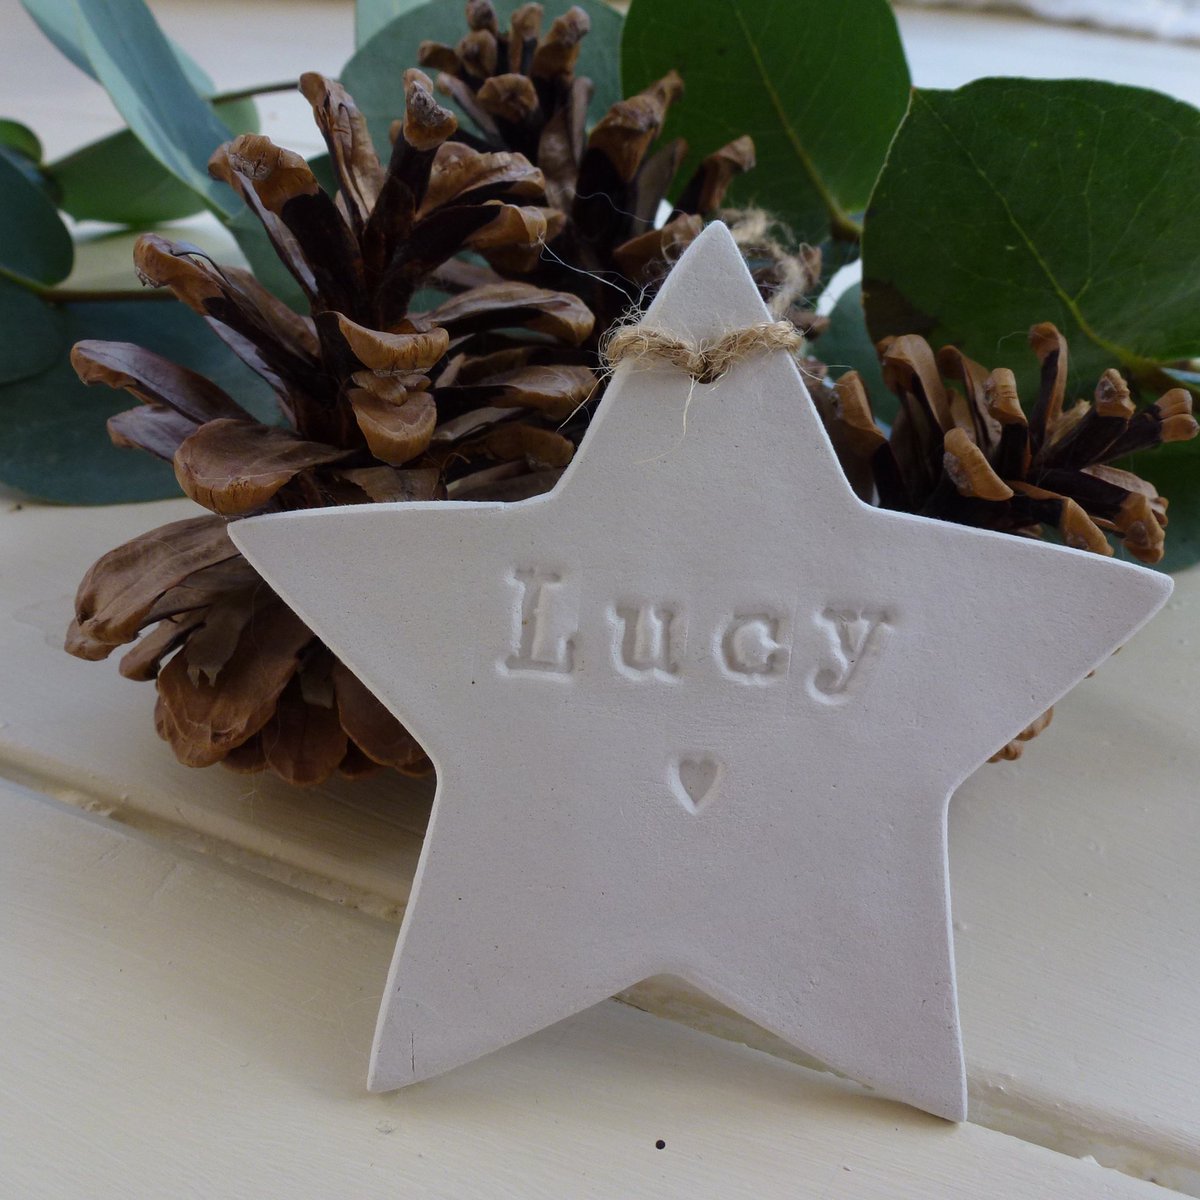 Personalised stars make a perfect gift this Christmas 🎅🏼 
Pop over to my Etsy shop 🤍 #claystar #personalisedchristmas #christmastree #christmasdecor #christmasdecorations #handmadeclay #rusticstar #claystardecor #handmadedecorations #handmadegifts #etsy #etsyuk #acornstationery